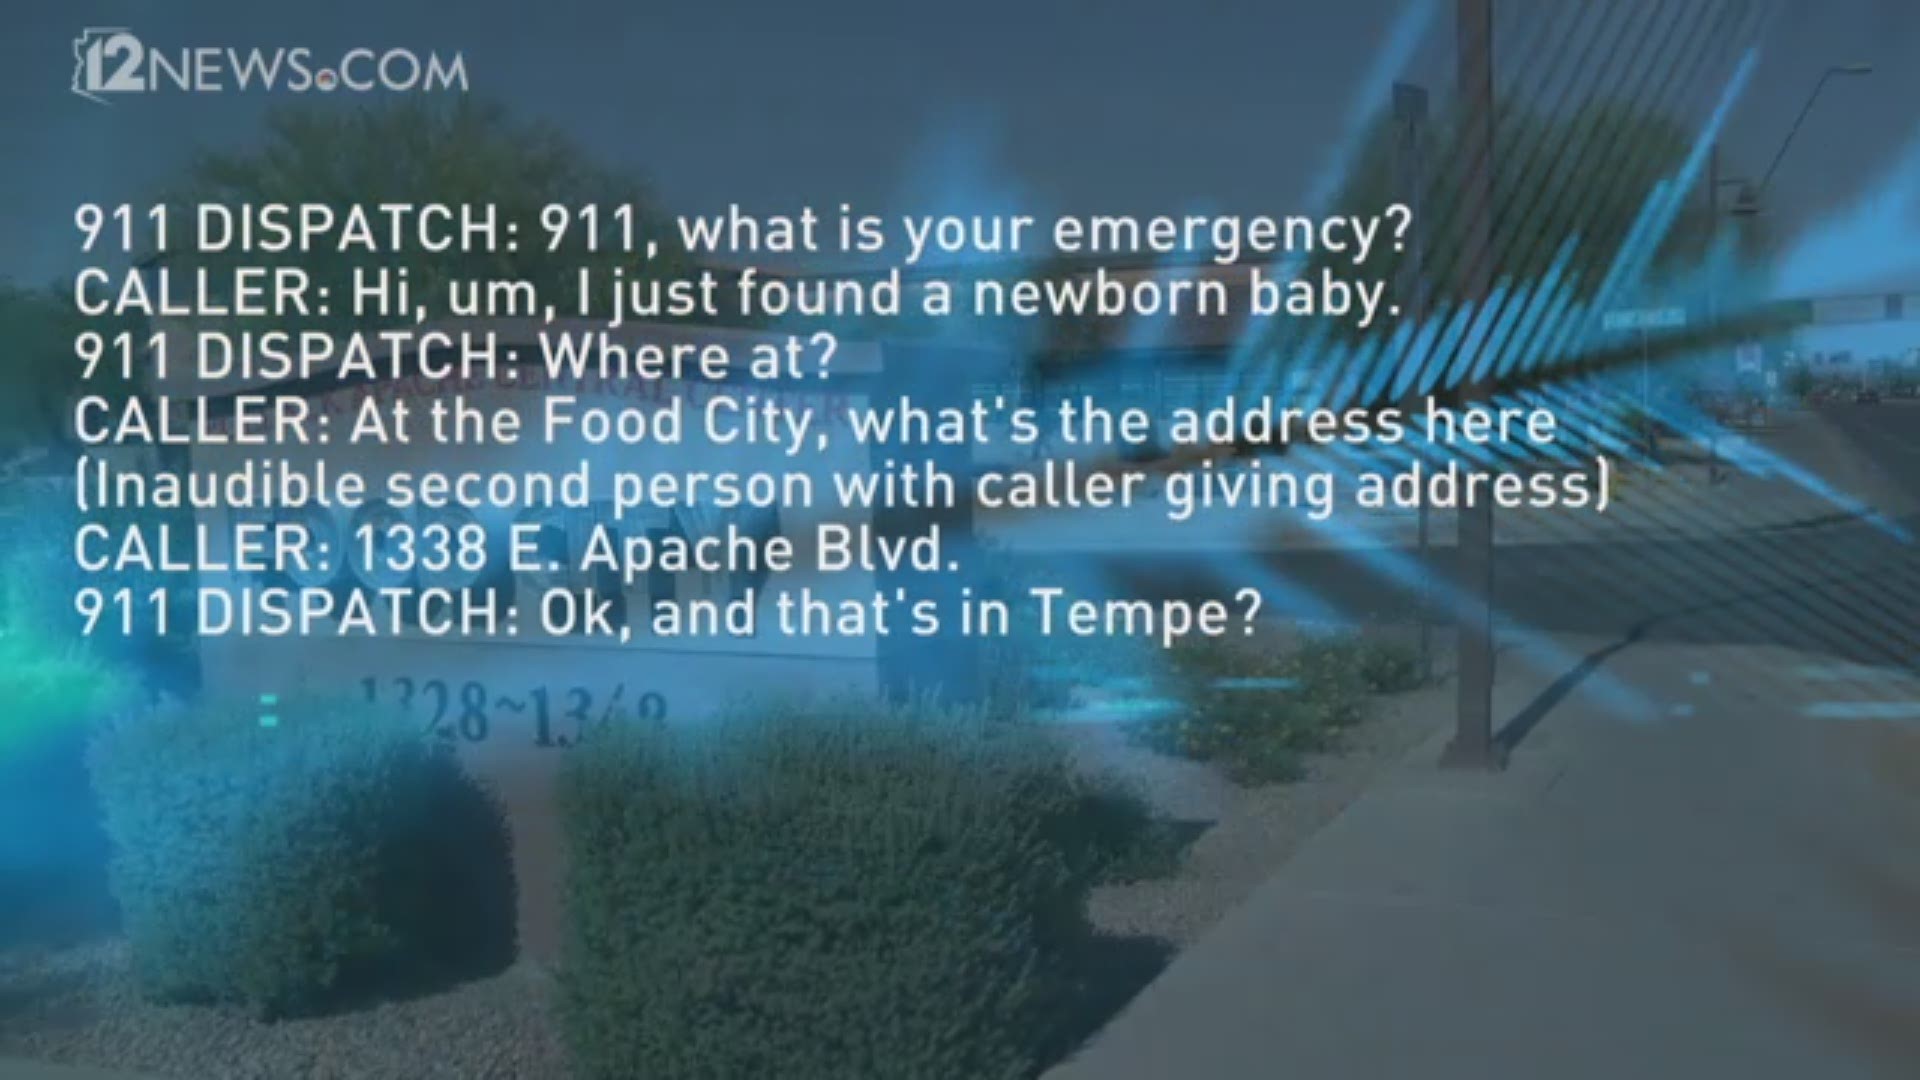 Tempe police have released the 911 call made after an abandoned baby was found in a shopping cart.